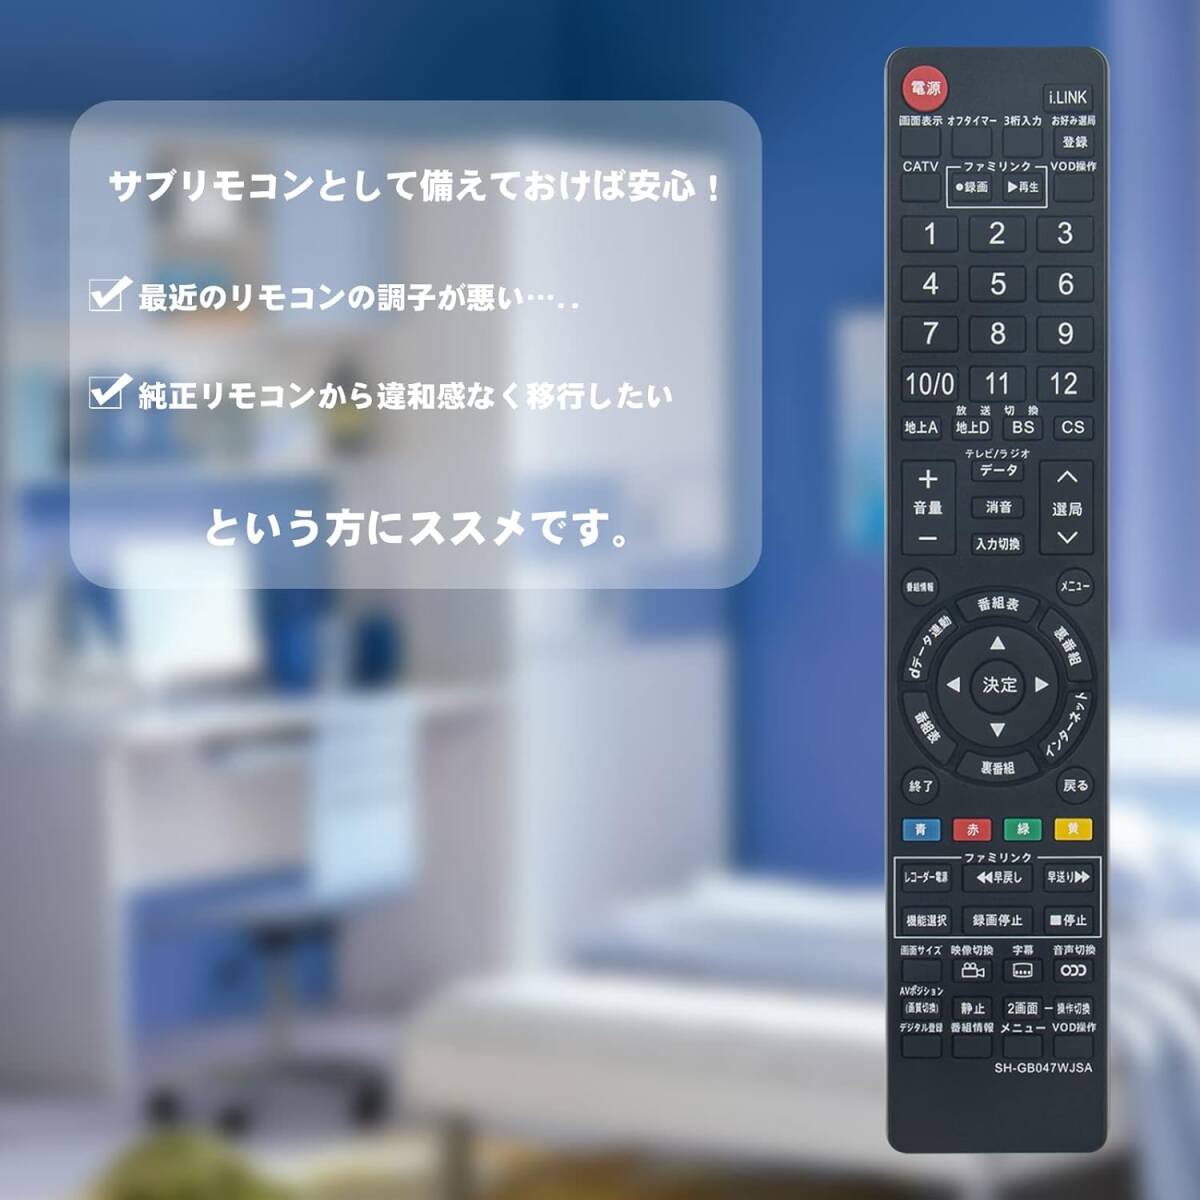 AULCMEET 液晶テレビ用リモコン fit for シャープGB047WJSA GA826WJSA GA716WJSA GA661WJSA GA615WJSA GA560WJSA GA560WJSB GA567WJSAなどの画像2